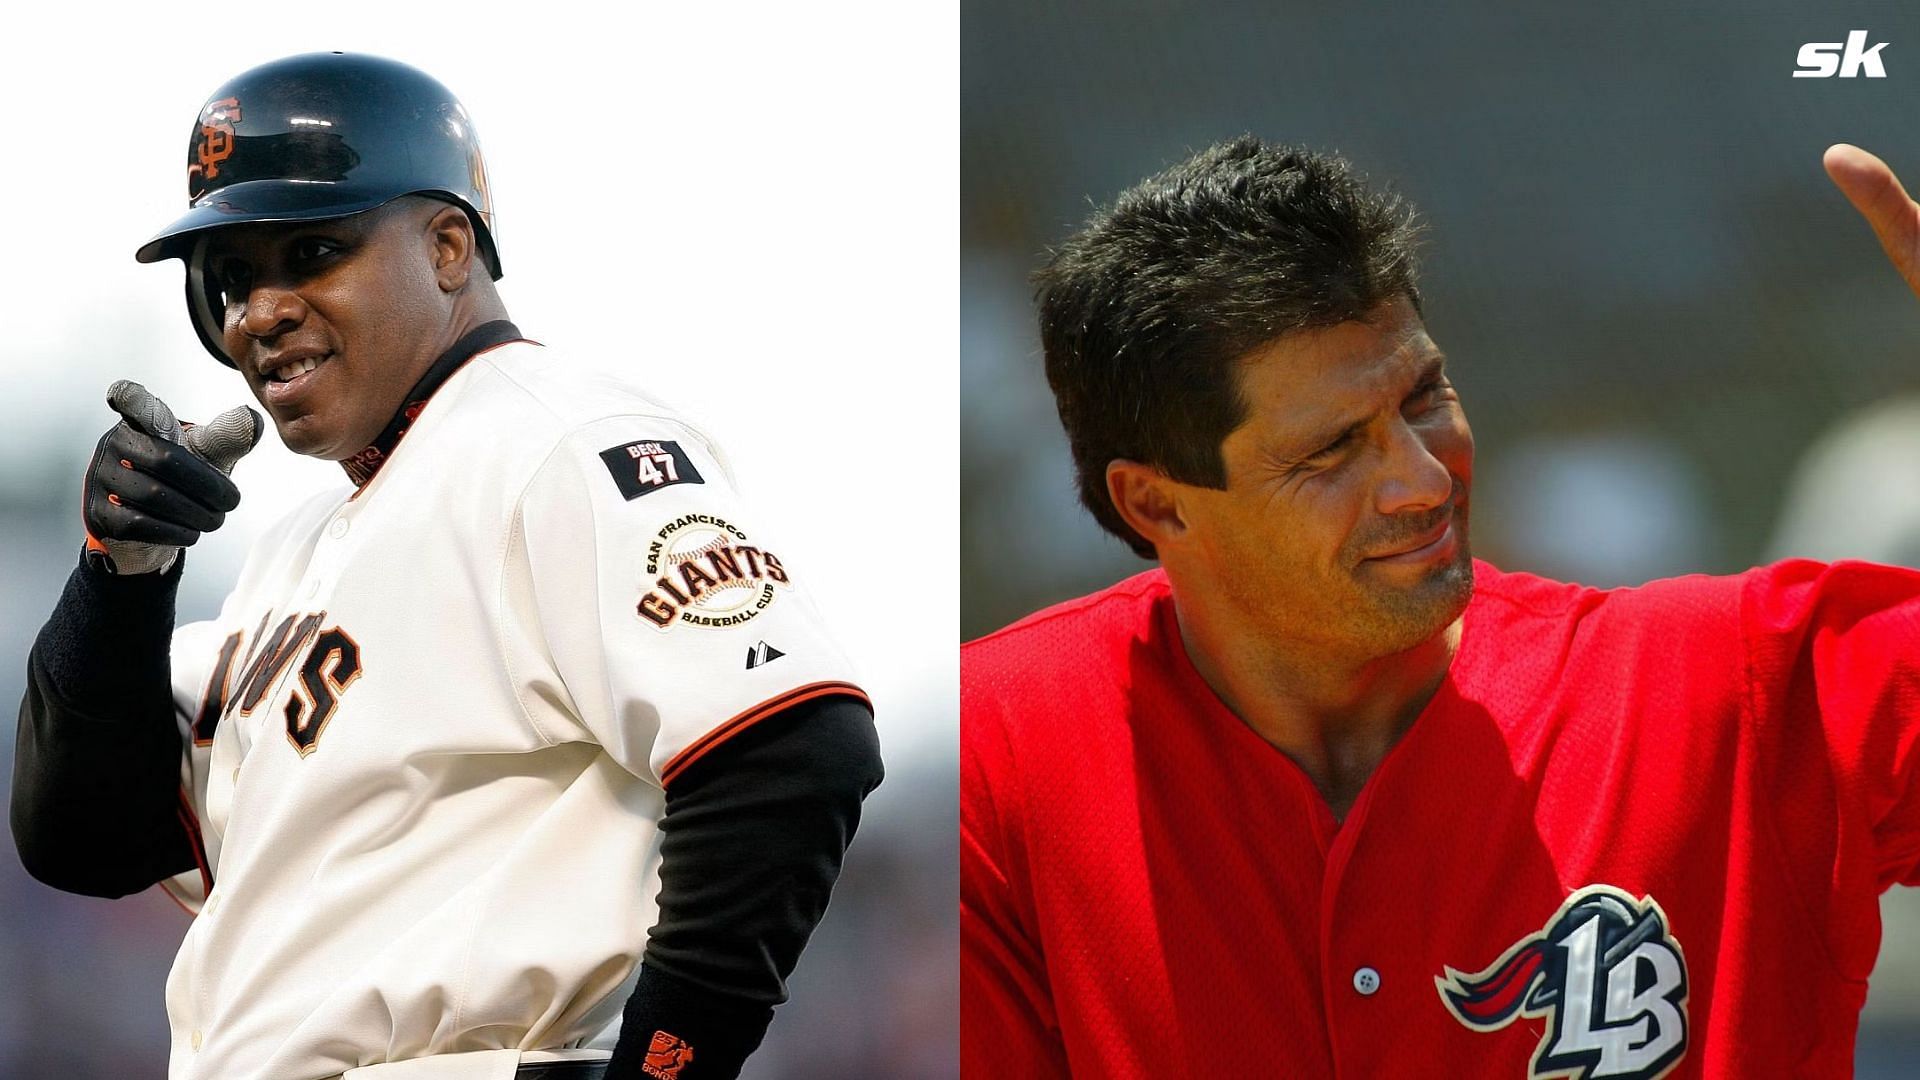 Former MLB left fielder Barry Bonds; Former MLB outfielder and designated hitter, Jose Canseco